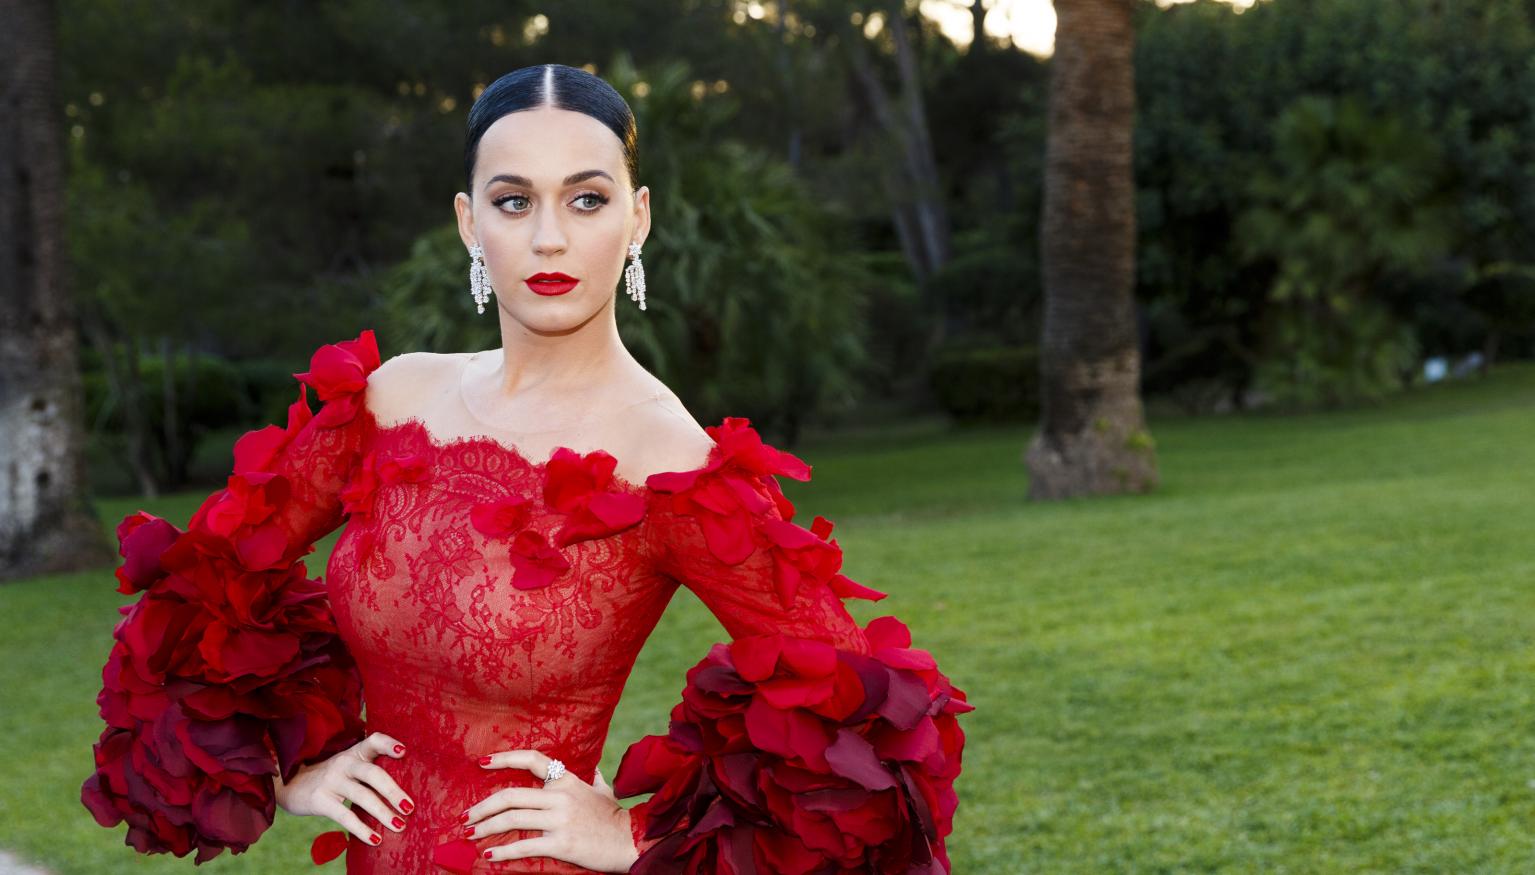 Katy Perry is now the most followed person on Twitter | Nova 919